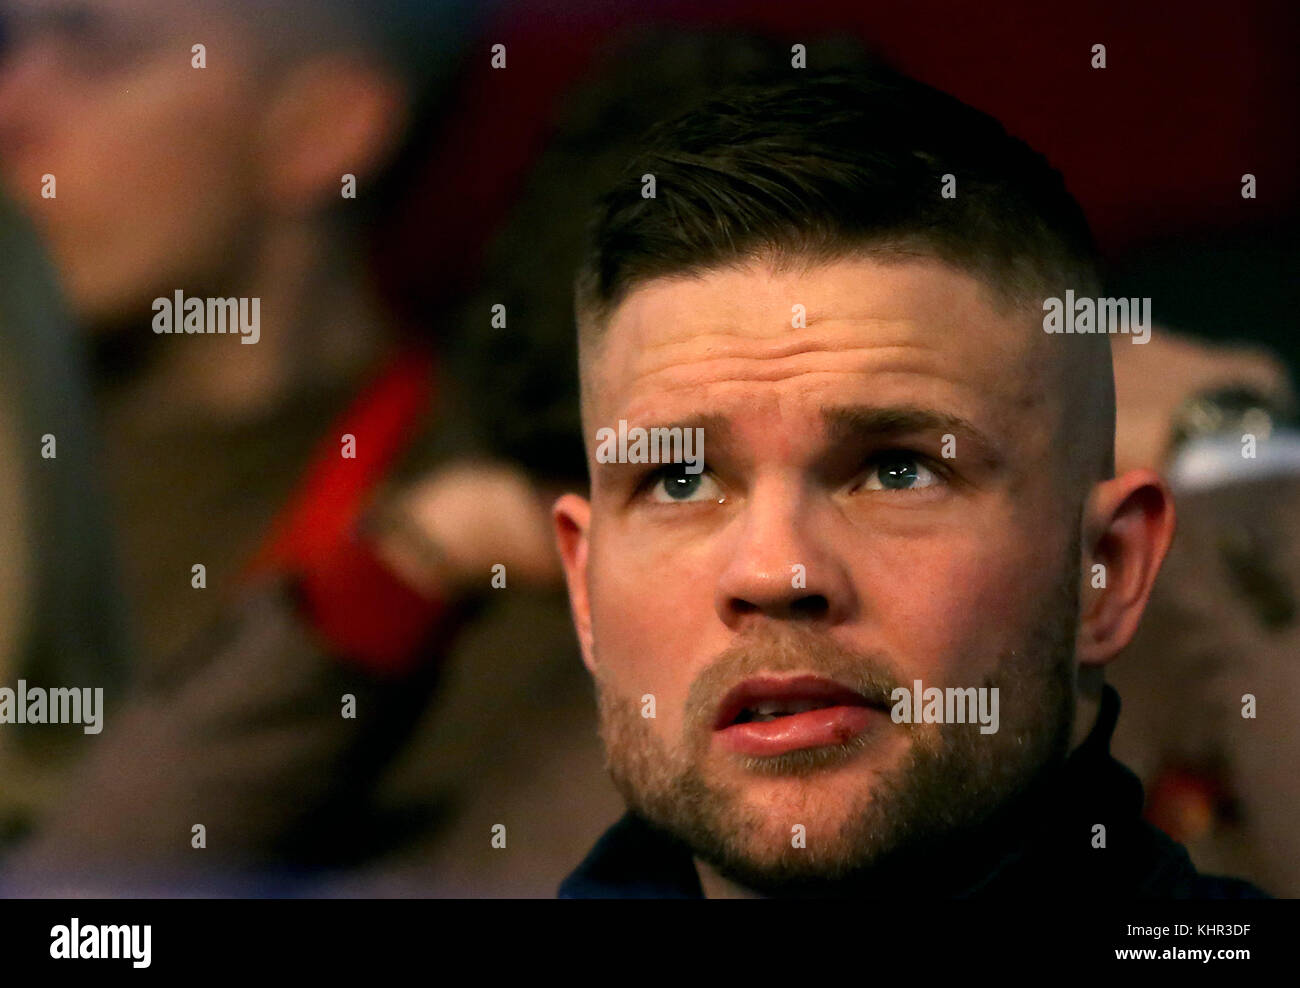 Boxer Conrad Cummings watches Steven Ward against Przemyslaw Binienda during their International Light-Heavyweight Contest at the SSE Arena Belfast. PRESS ASSOCIATION Photo. Picture date: Saturday November 18, 2017. See PA story BOXING Belfast. Photo credit should read: Liam McBurney/PA Wire Stock Photo